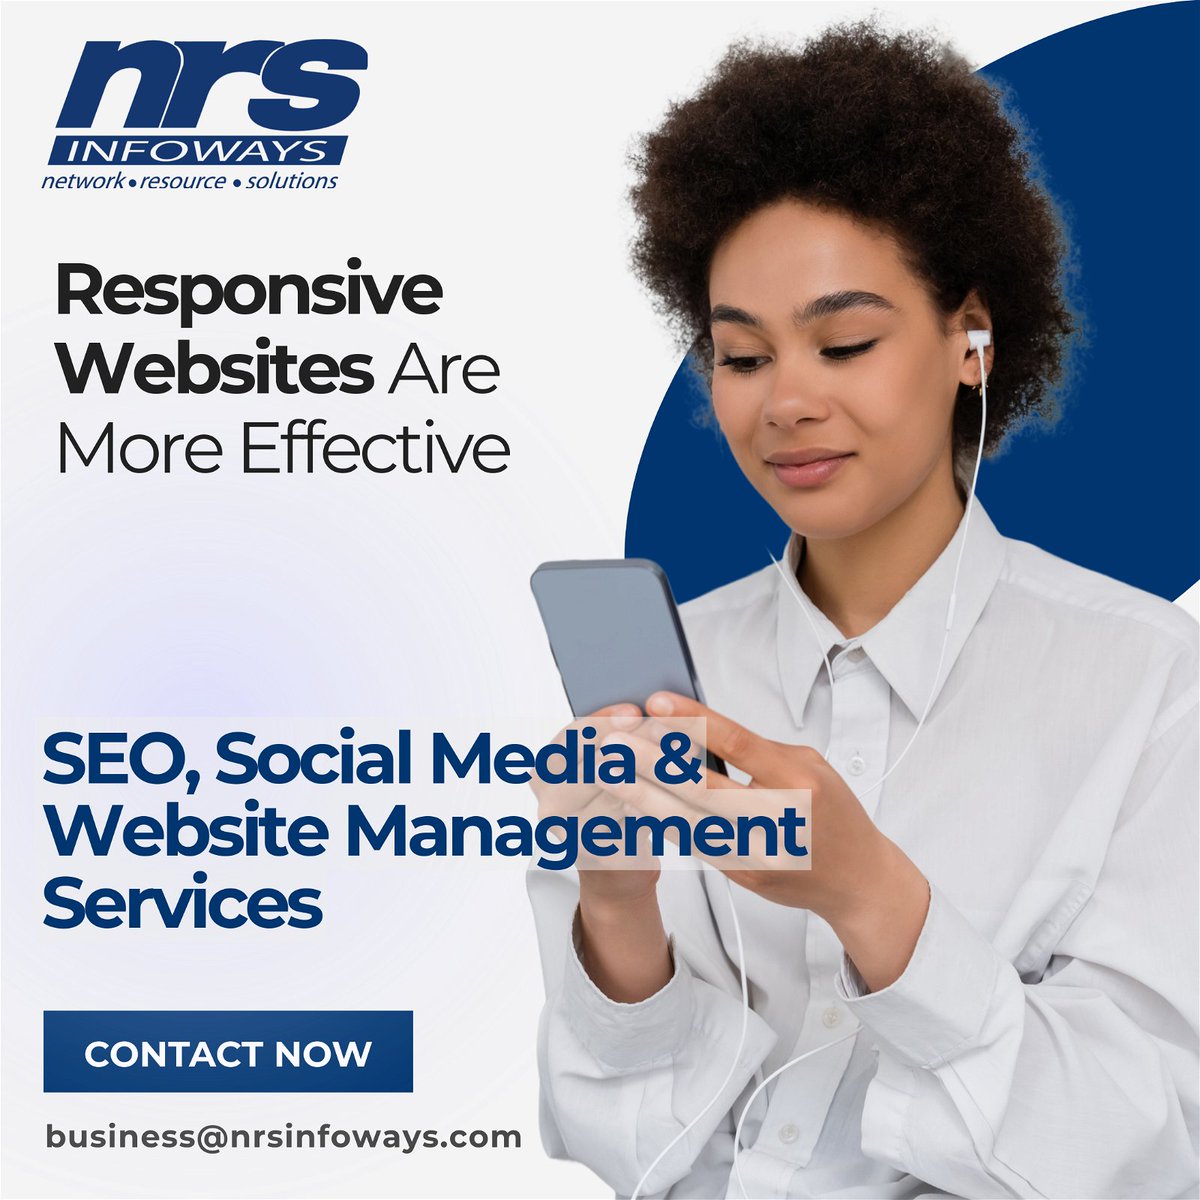 Responsive Websites Are More Effective

A website should function efficiently on all devices and screen sizes. Users have a low tolerance for slow or glitchy sites.

We can help
Lets discuss business@nrsinfoways.com
#responsivewebsites #userexperience #webdesign #seo #nrsinfoways